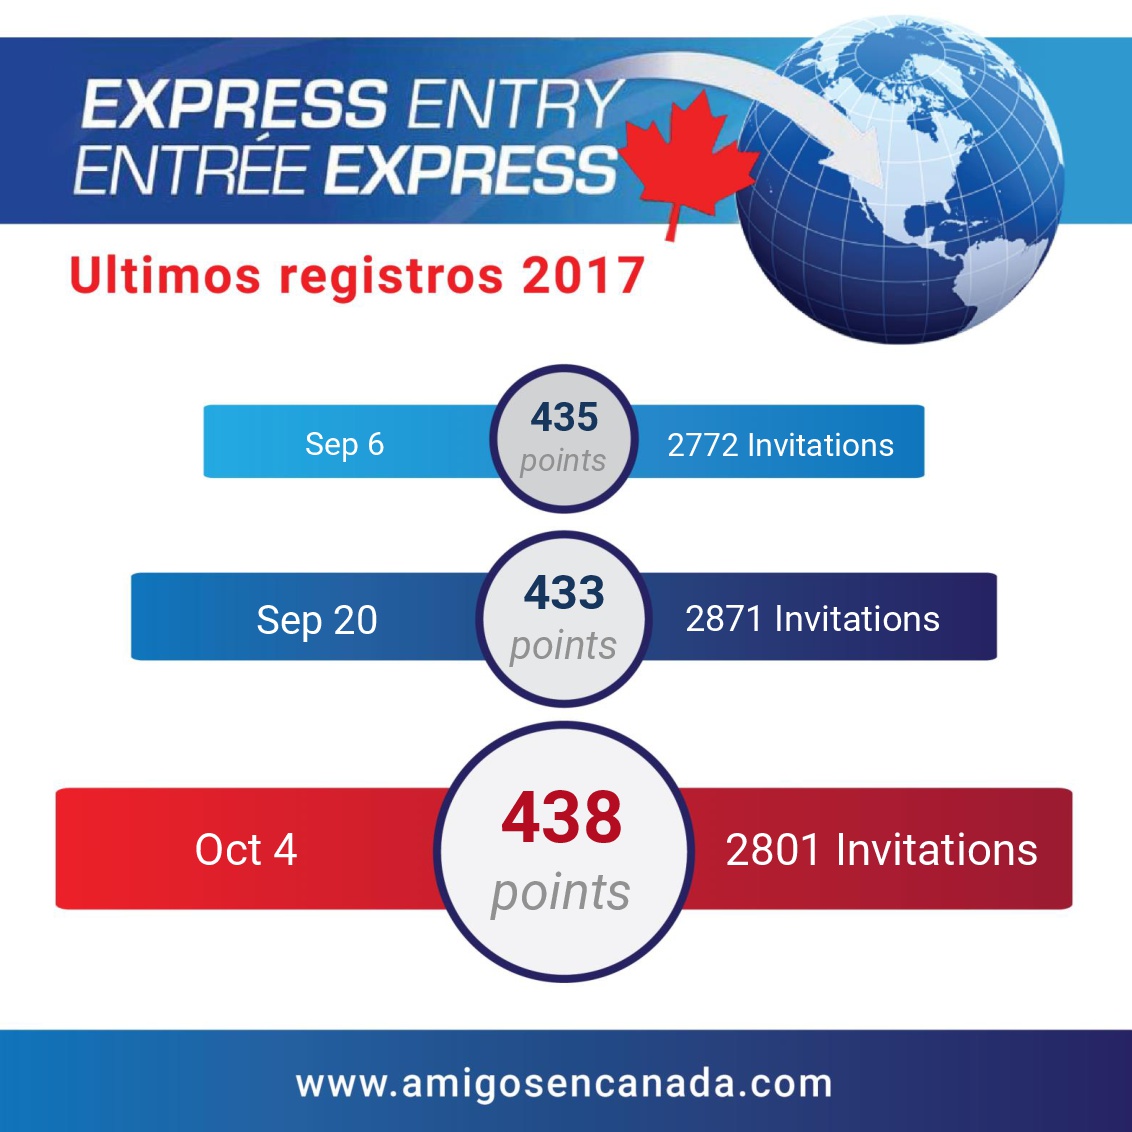 EXPRESS ENTRY 4 OCT